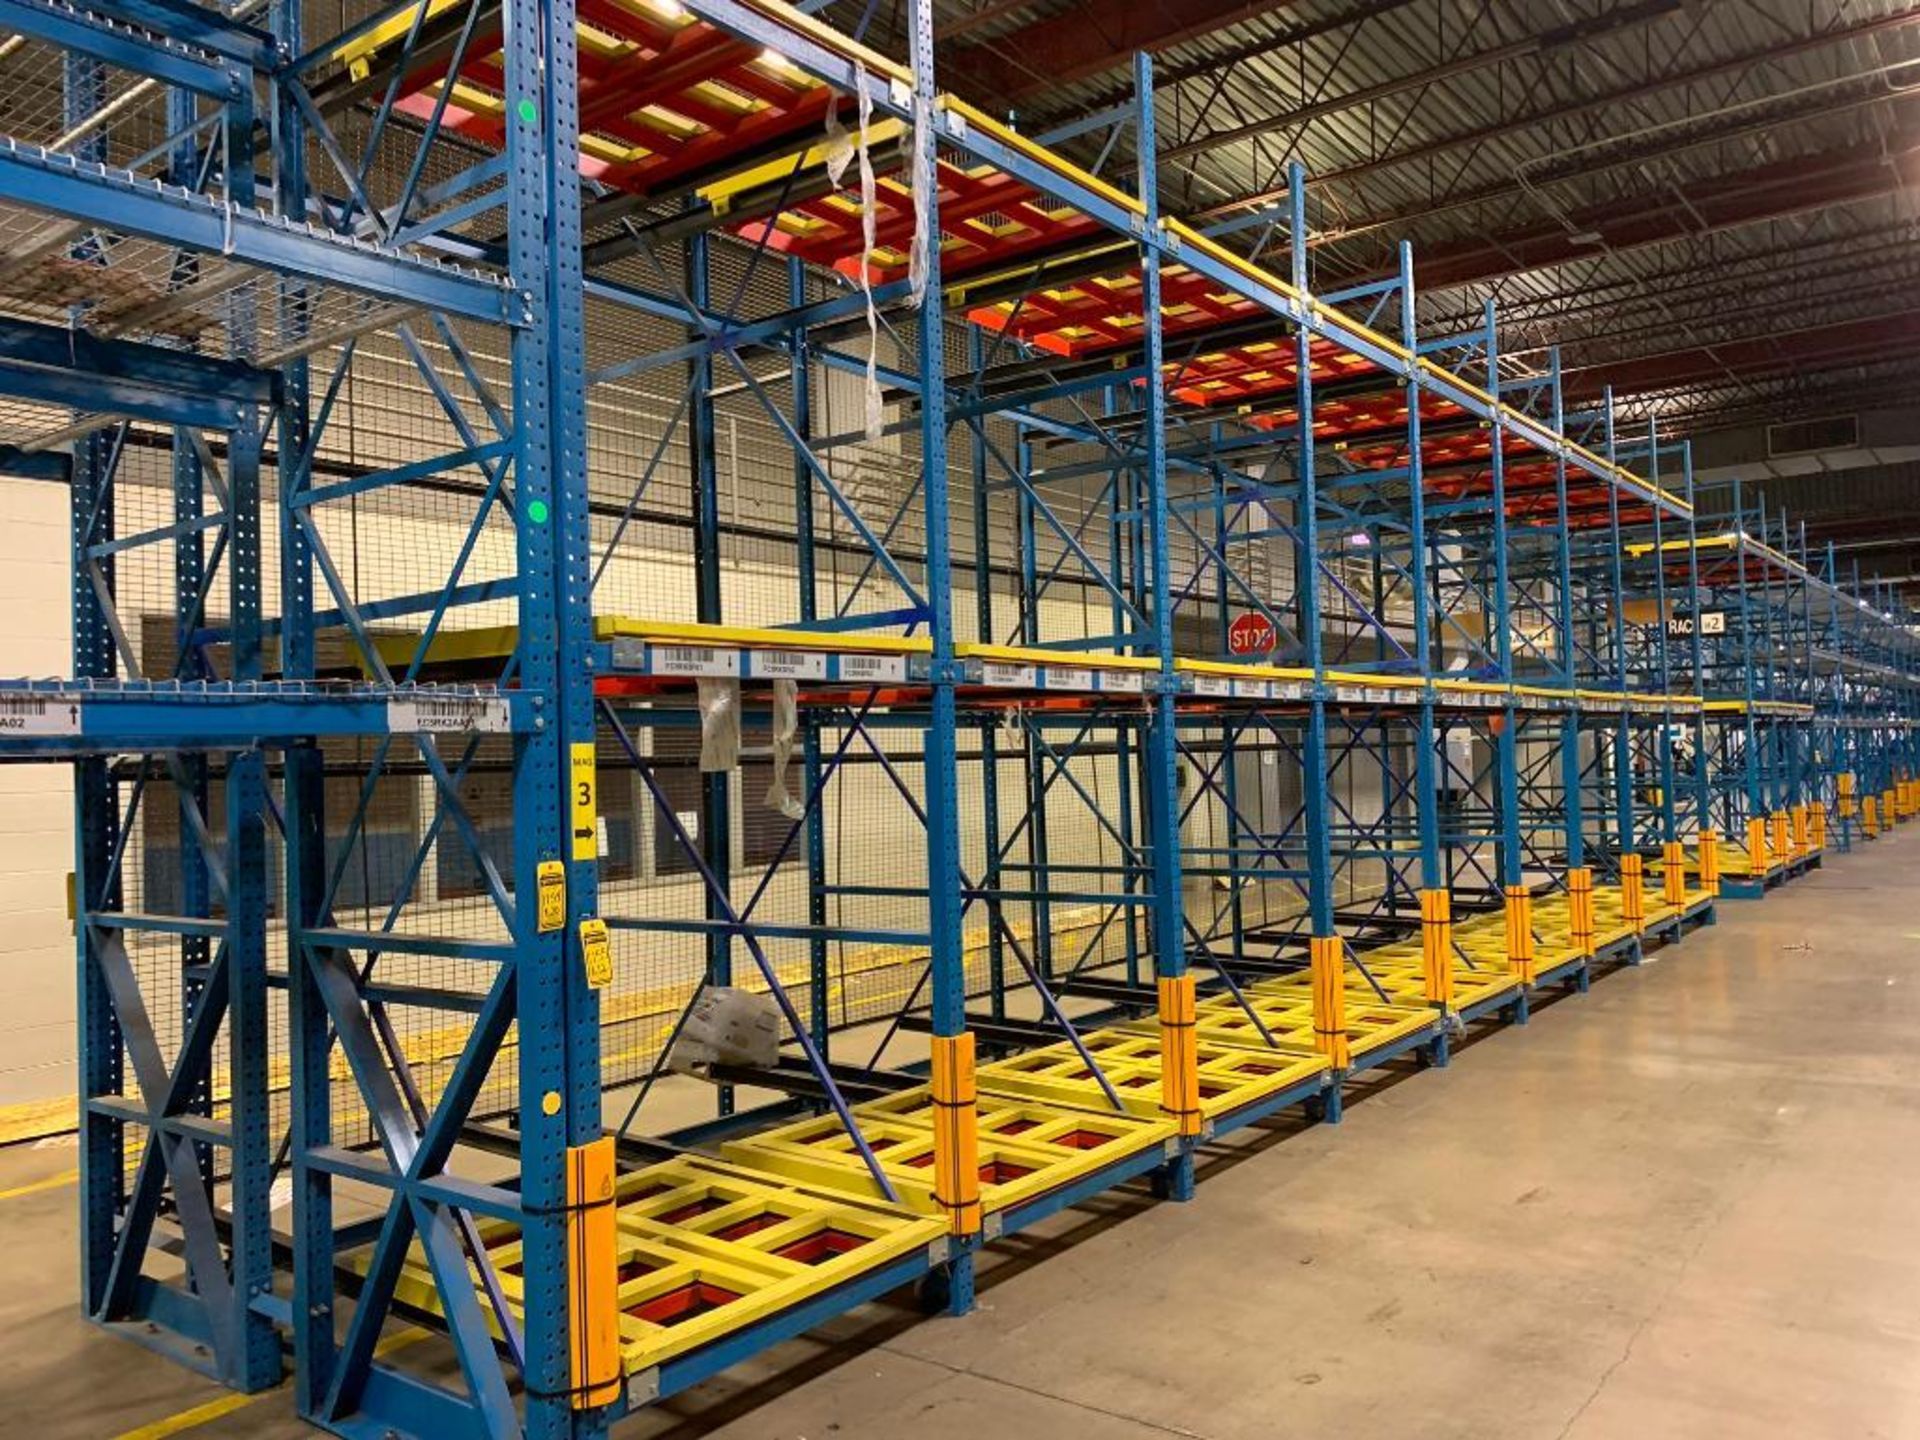 (12x) Bays of Bolt-Together Push-Back Pallet Rack; 15' T X 104" D, Each Bay Has (6) Pallet Positions - Image 2 of 12